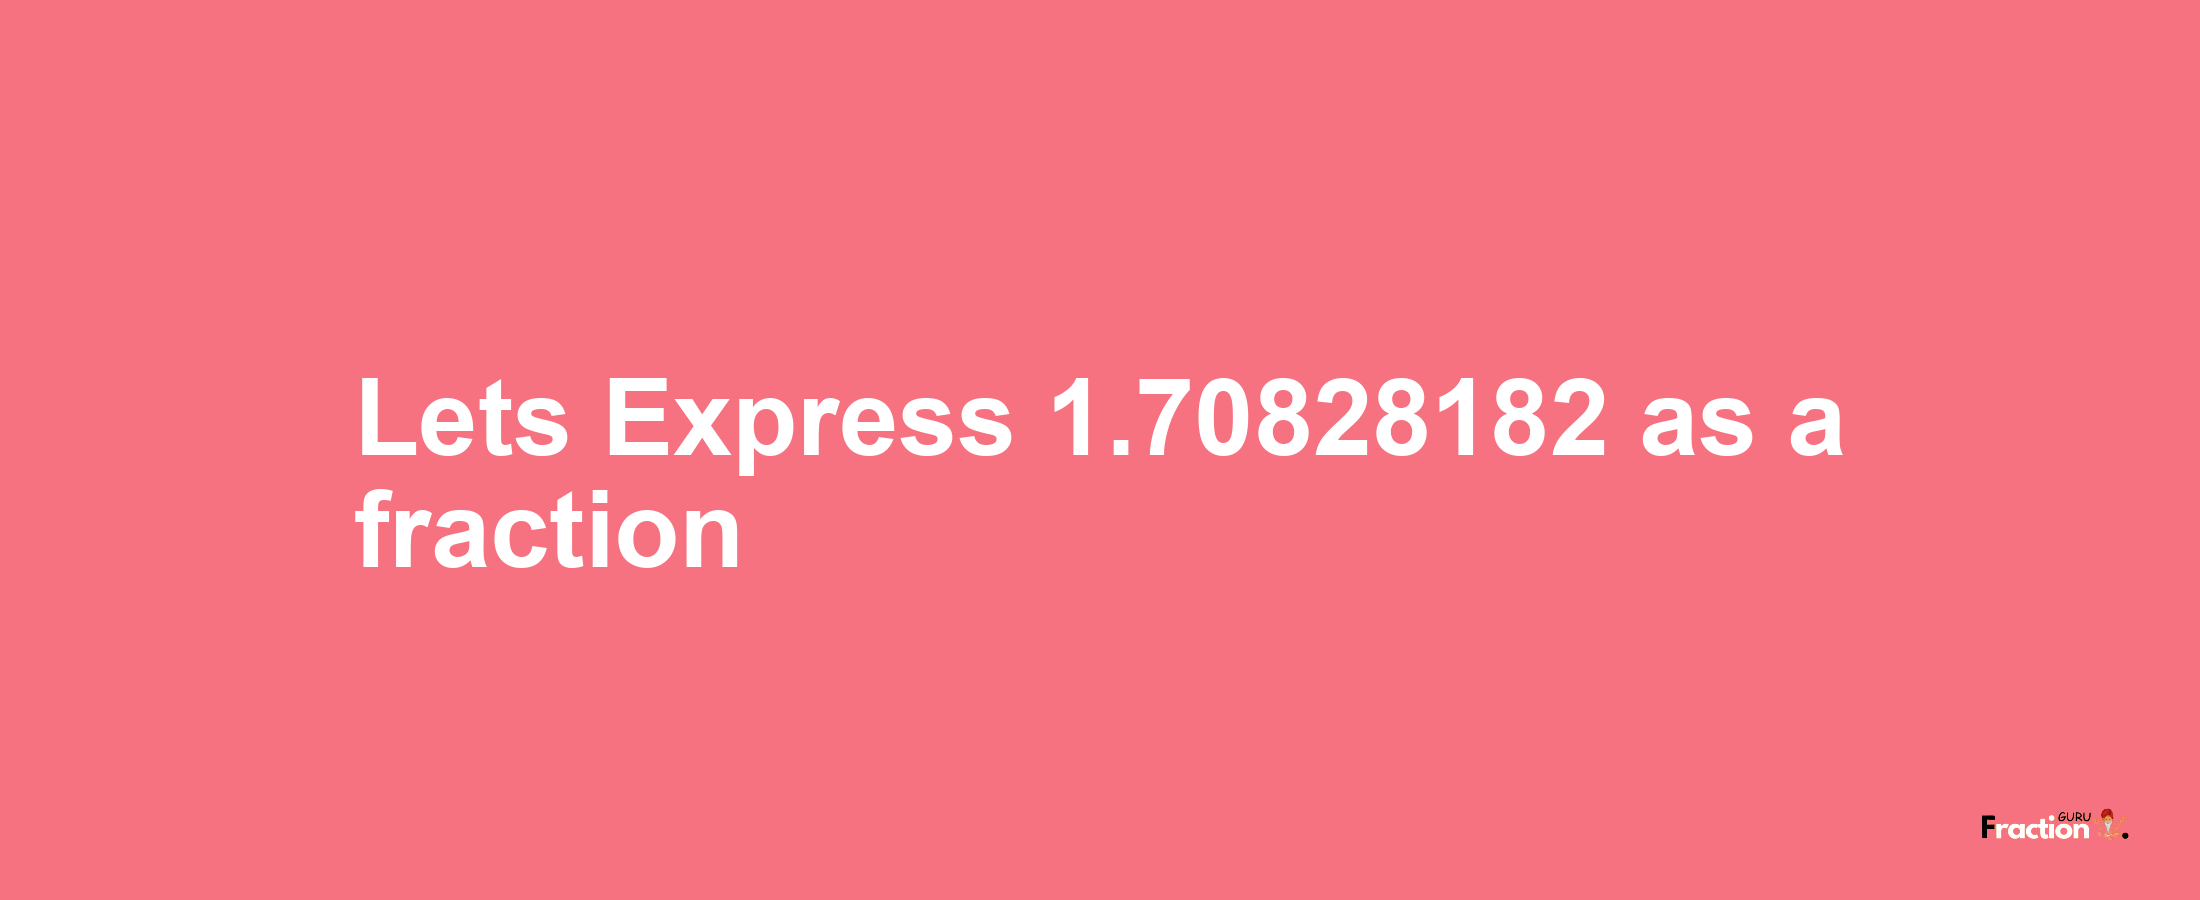 Lets Express 1.70828182 as afraction